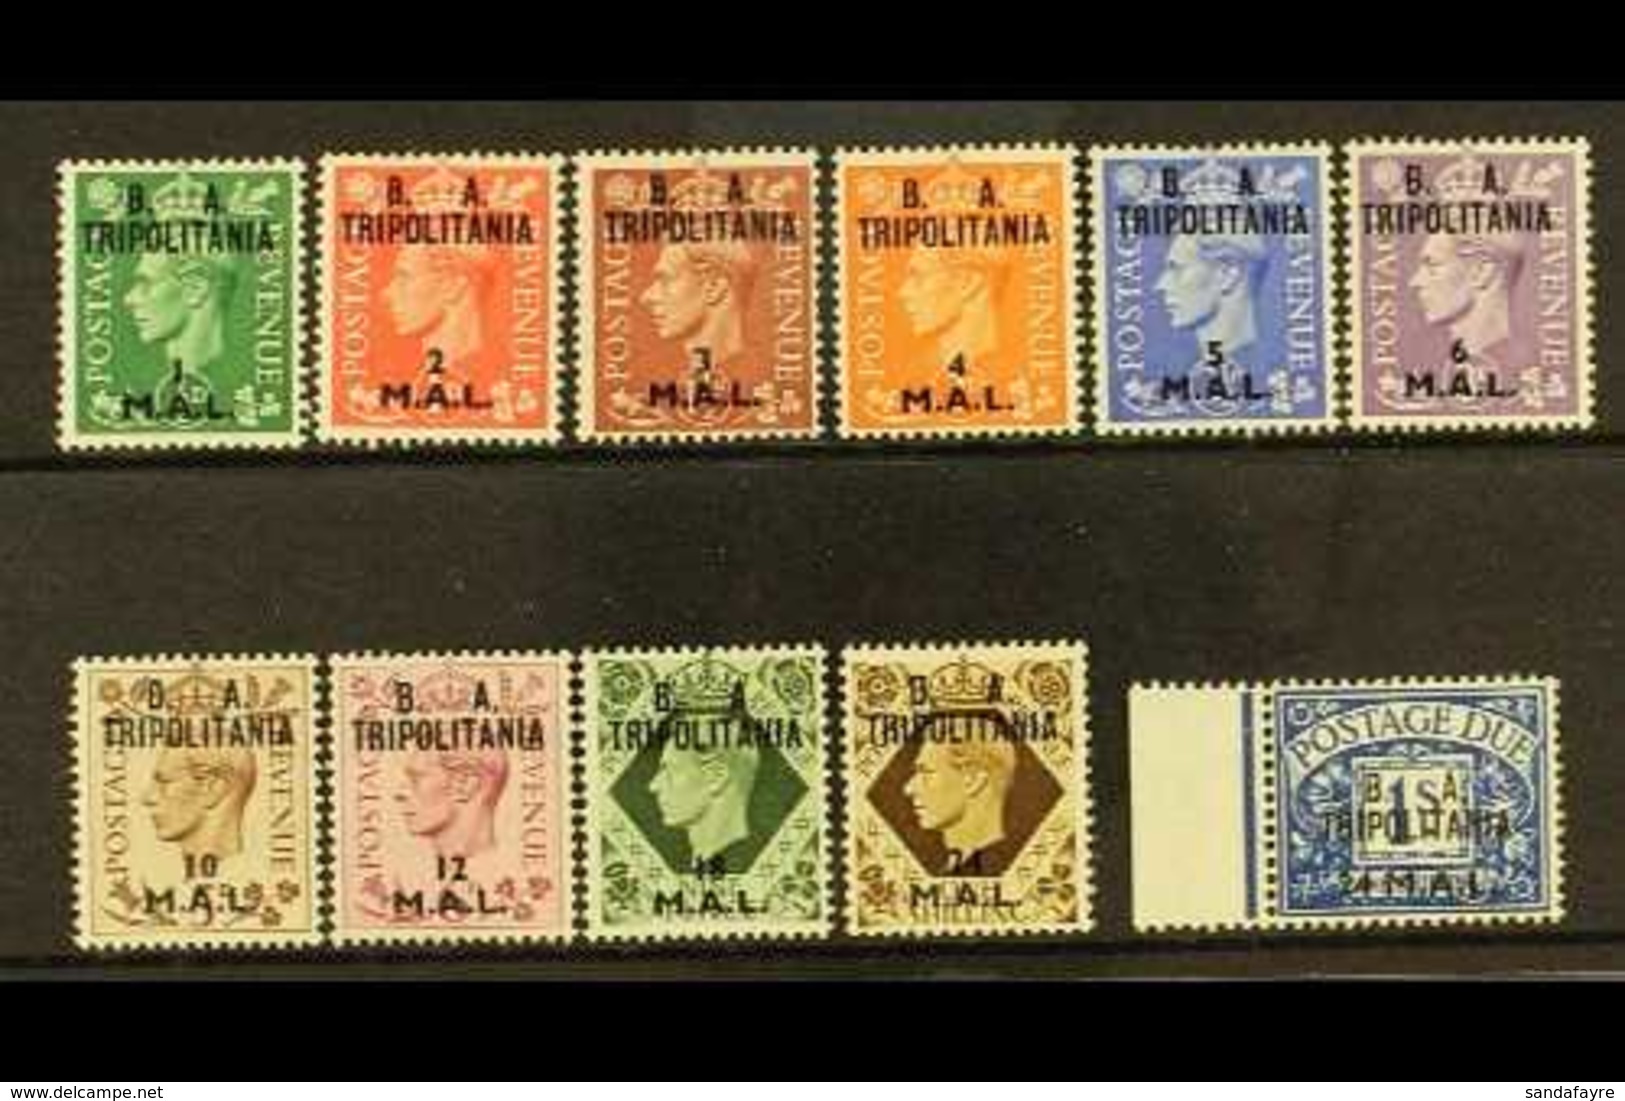 TRIPOLITANIA  1950 "B.A." Set To 24L On 1s (SG T14/23), Plus 24L On 1s Postage Due (SG TD10), Very Fine Mint. (11 Stamps - Italiaans Oost-Afrika